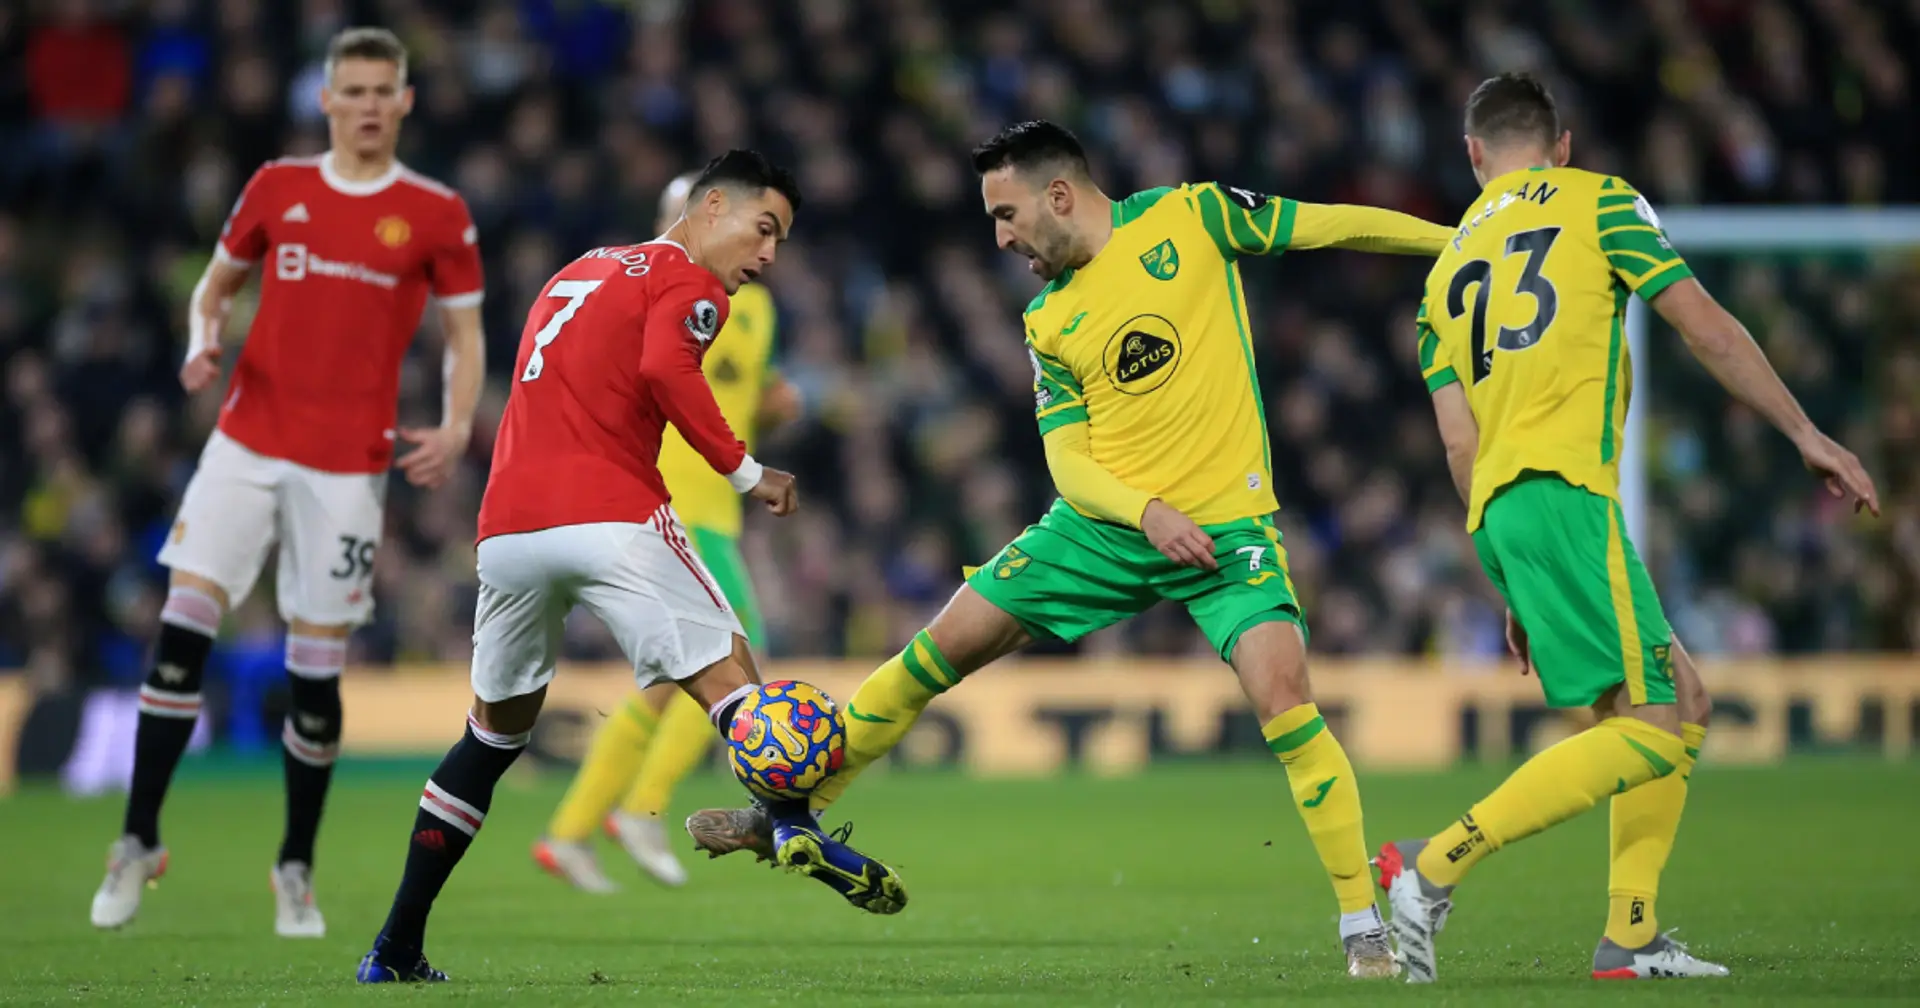 Norwich City 0-1 Man United, FT. LIVE updates, reactions, stats, ratings